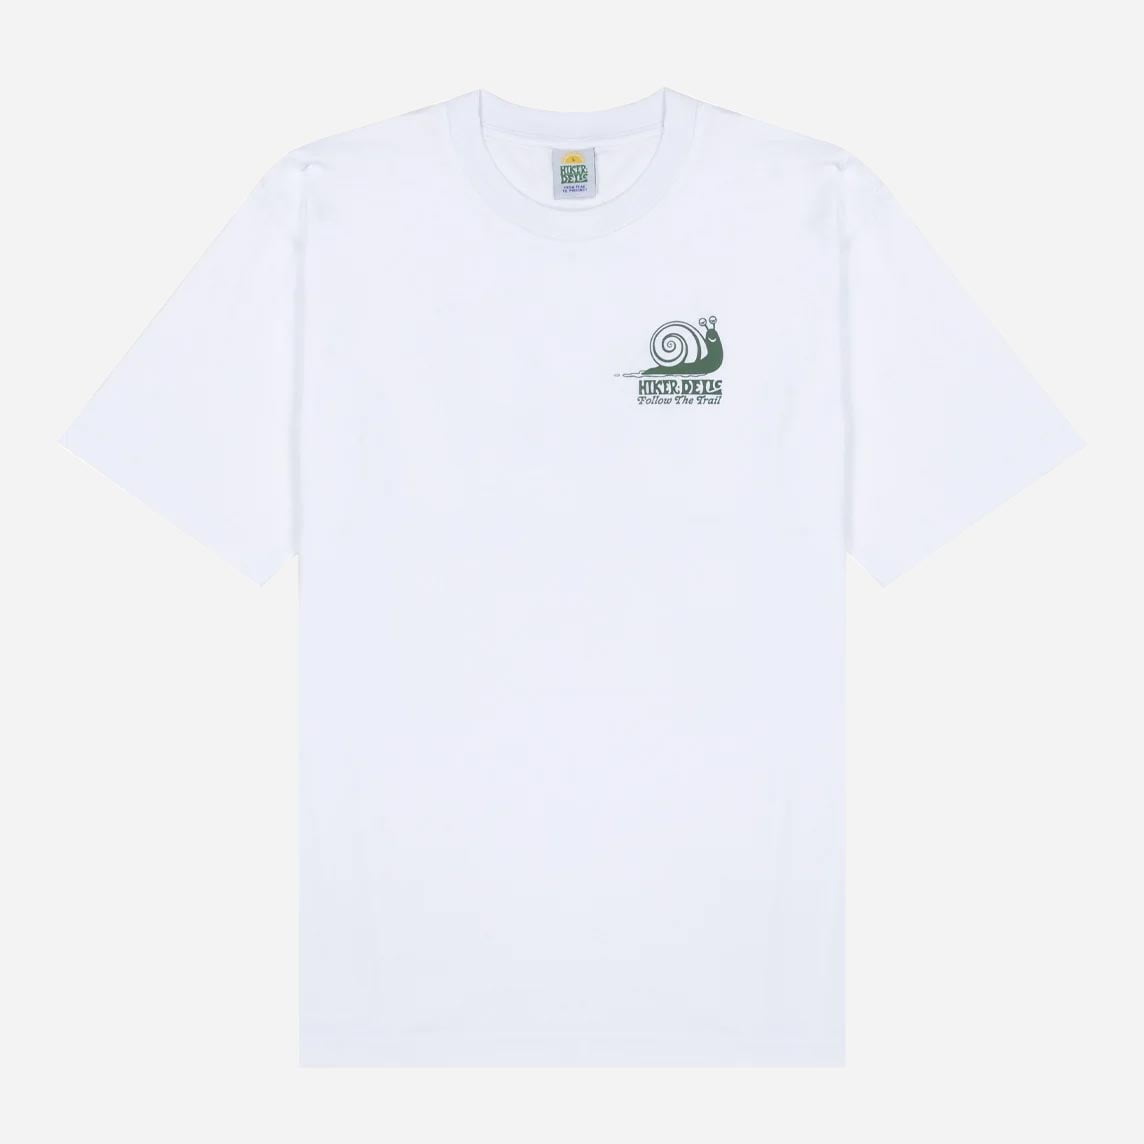 Hikerdelic Follow The Trail Regular Fit Short Sleeve Tee - White